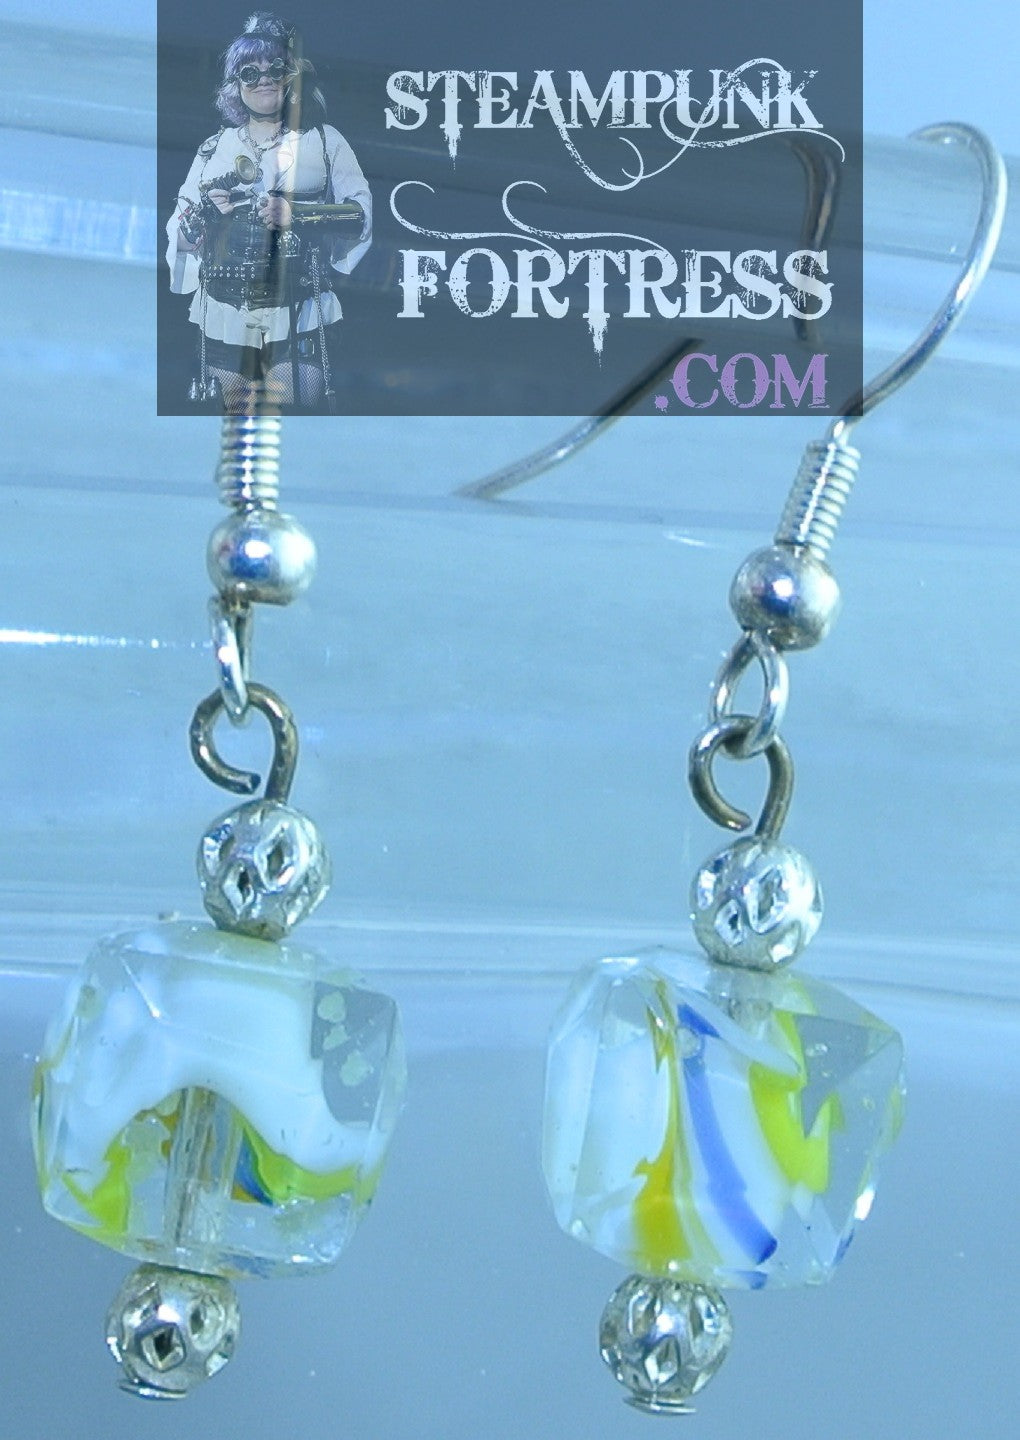 GLOW IN THE DARK SILVER YELLOW CLEAR BEADS FILIGREE PIERCED EARRINGS SET AVAILABLE STARR WILDE STEAMPUNK FORTRESS